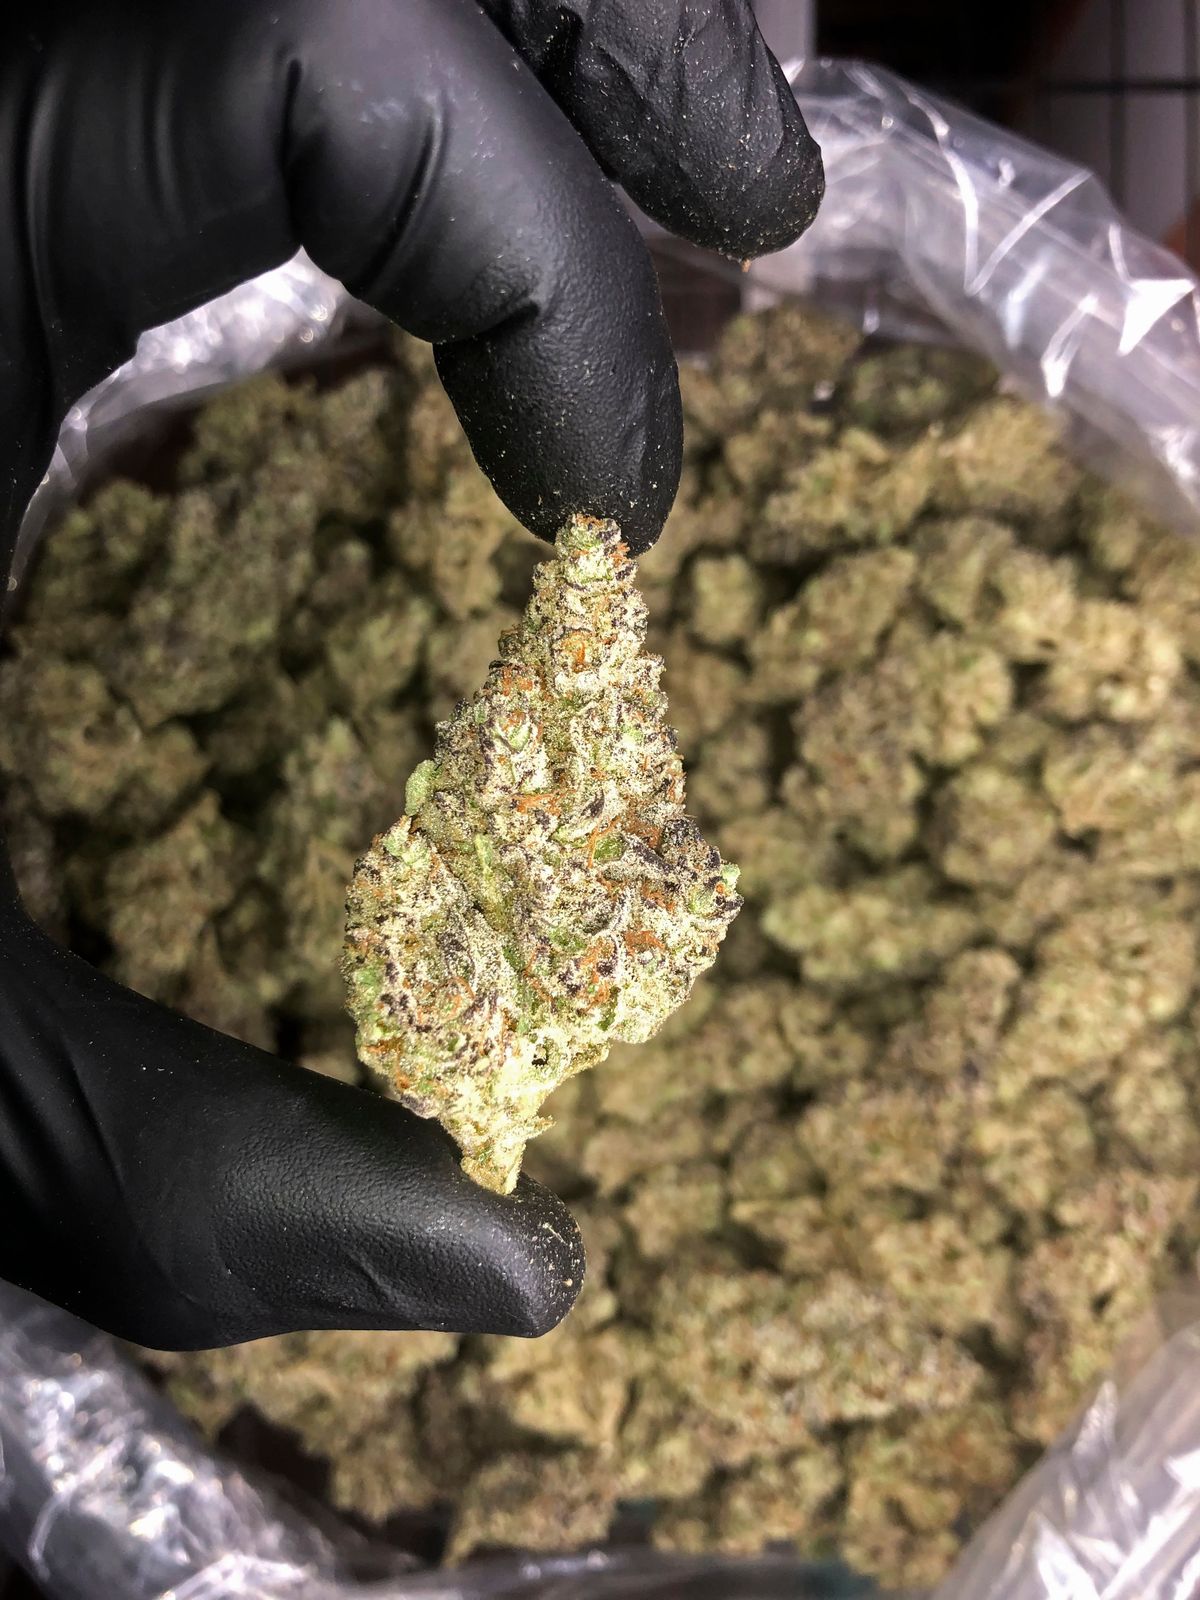 This photo provided by a marijuana cultivator under the condition of anonymity shows trimmed cannabis buds grown in Northern California on Dec. 3, 2021. As California enters its fifth year of broad legal marijuana sales, an unwelcome trend is emerging in the struggling marketplace. Industry experts say a growing number of license holders also are secretly operating in the illegal market — working both sides of the economy to make ends meet.  (HONS)